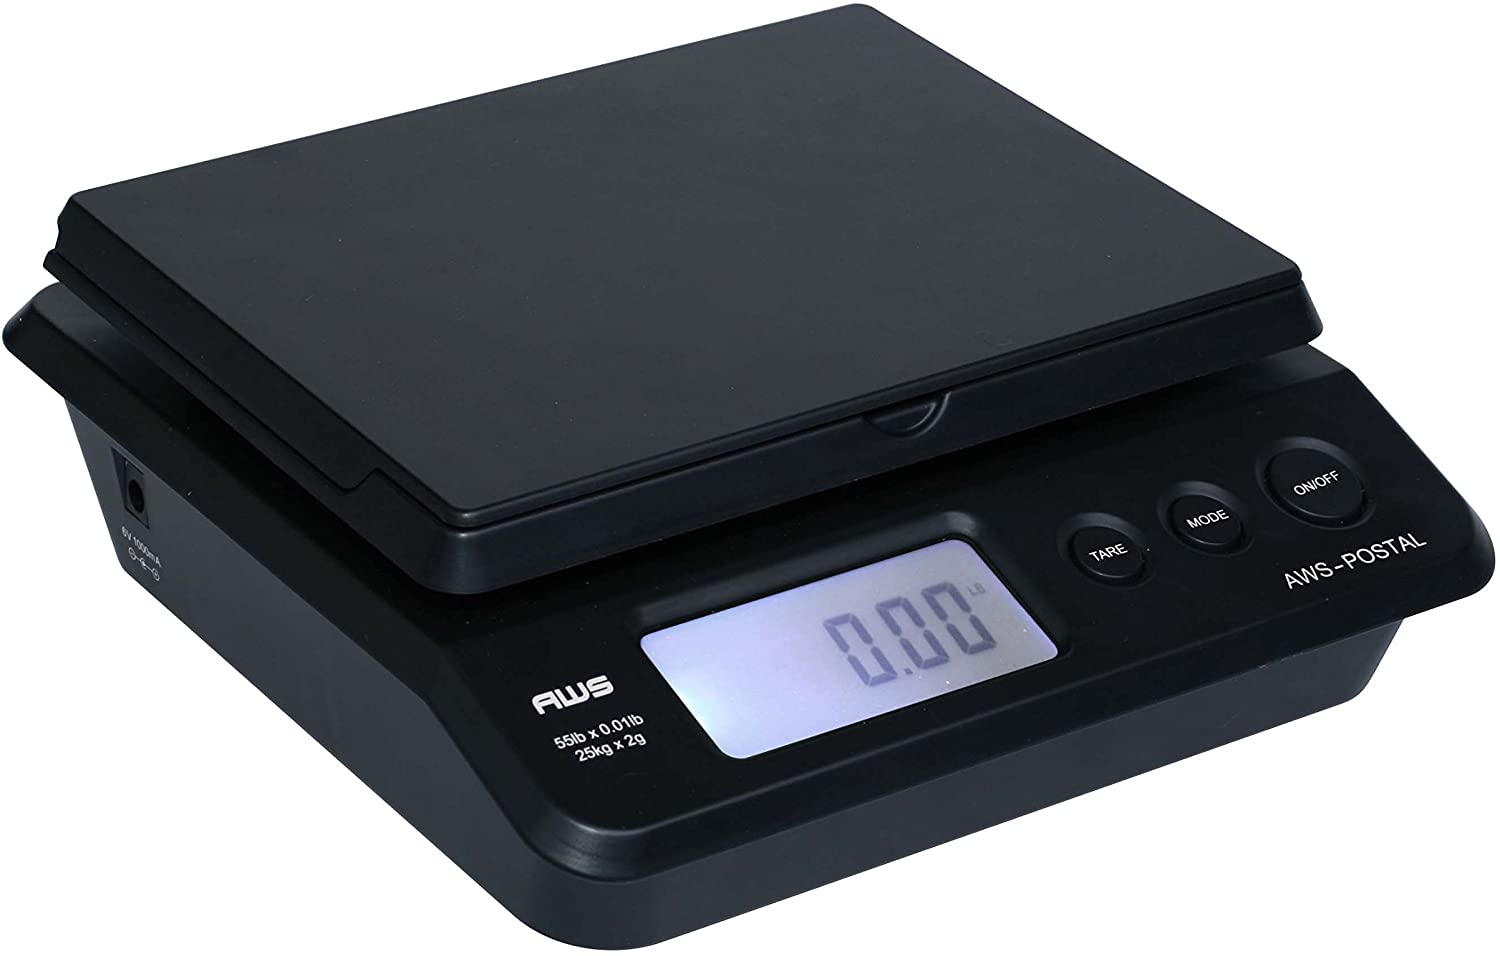 American Weigh Scales PS-25 Smart Postage Meter